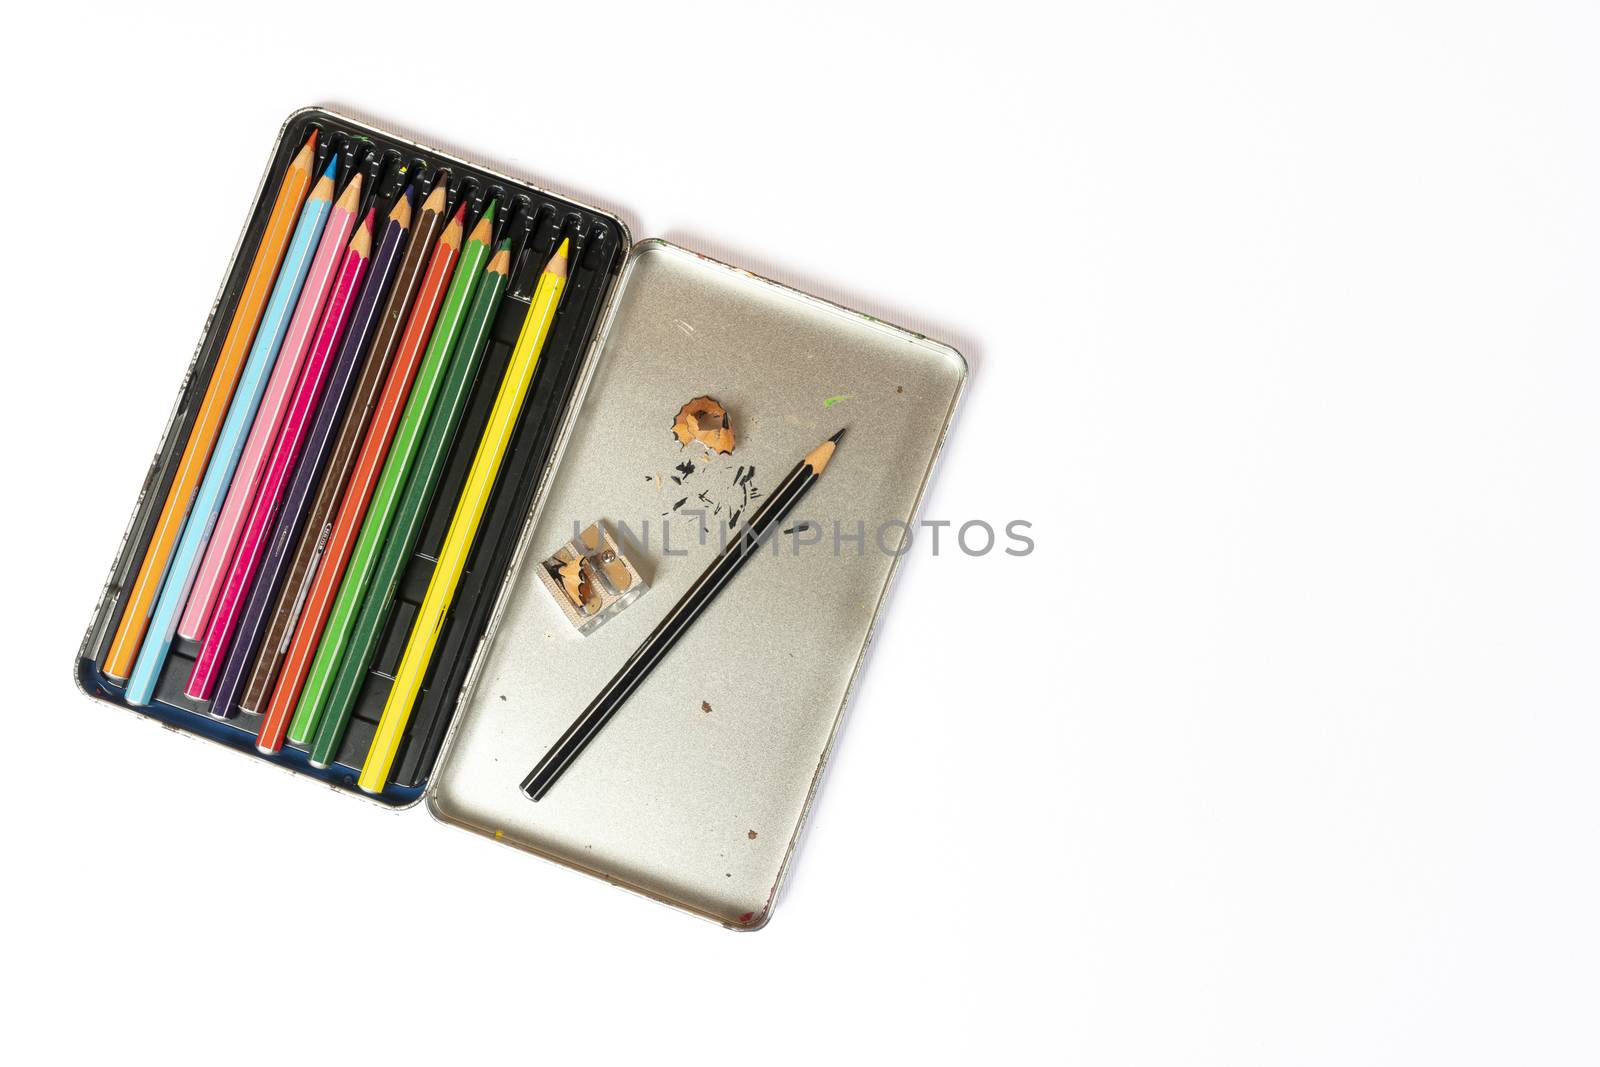 a metal box of colored pencils by sergiodv